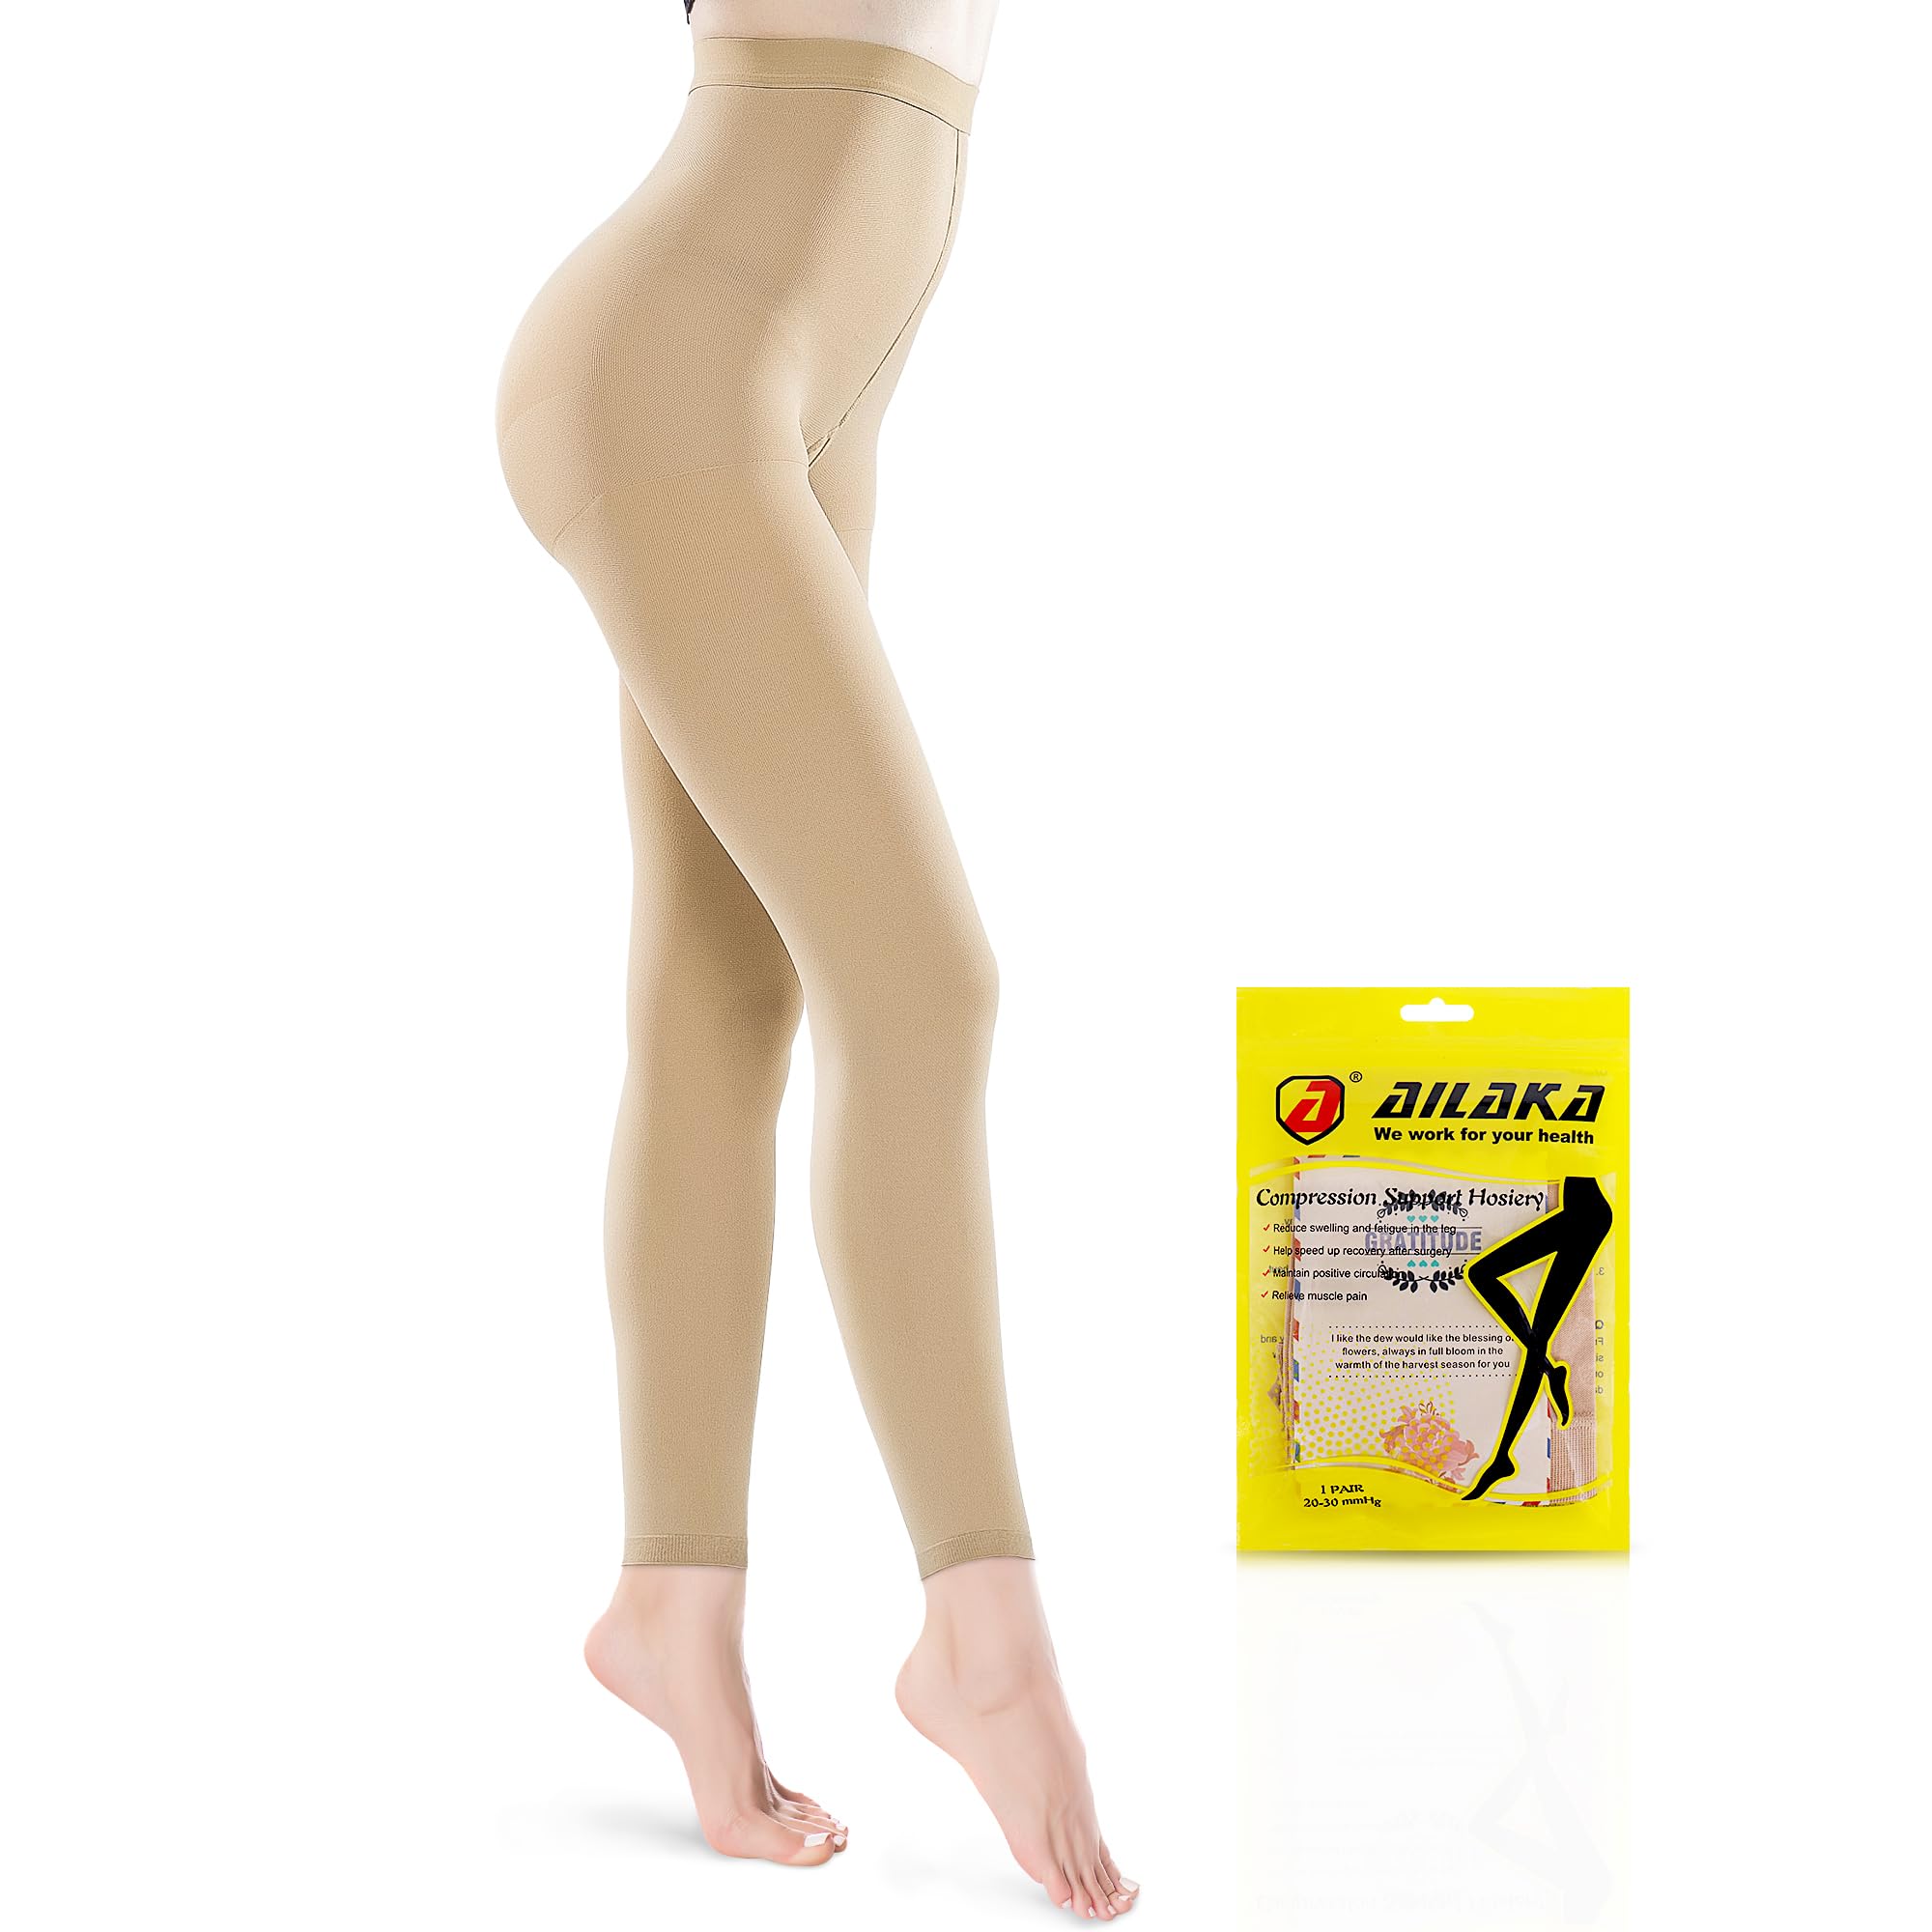 Ailaka Compression Pantyhose for Men Women Firm Graduated Support